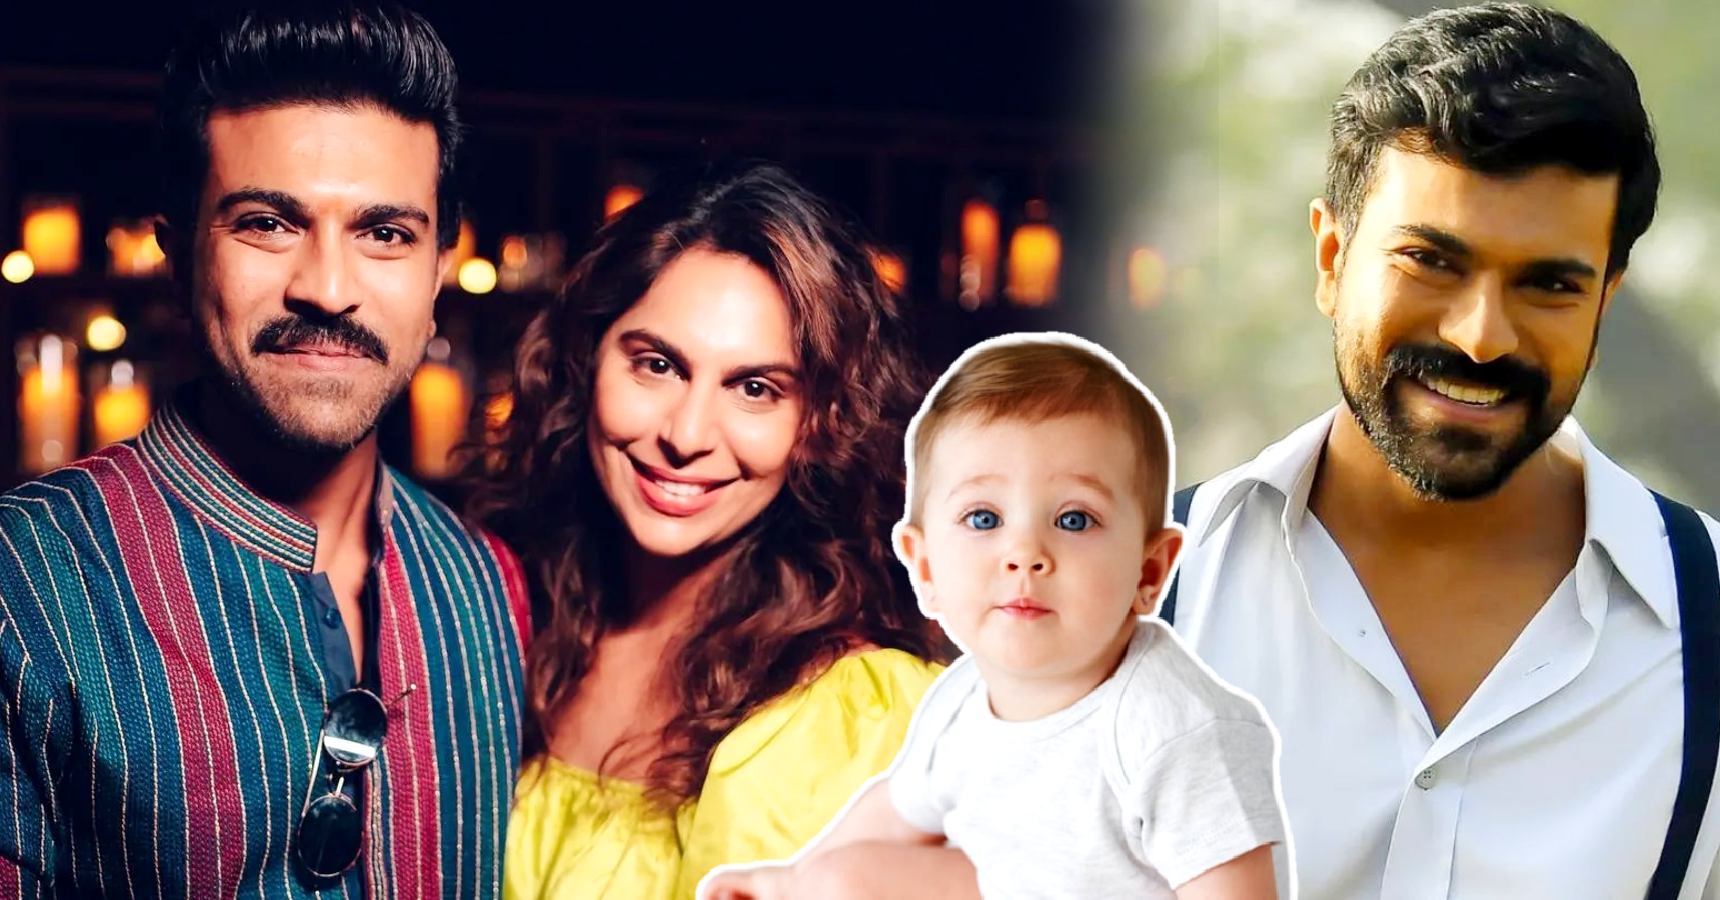 Ram Charan’s wife Upasana Kamineni reveals she is going deliver her first child in India